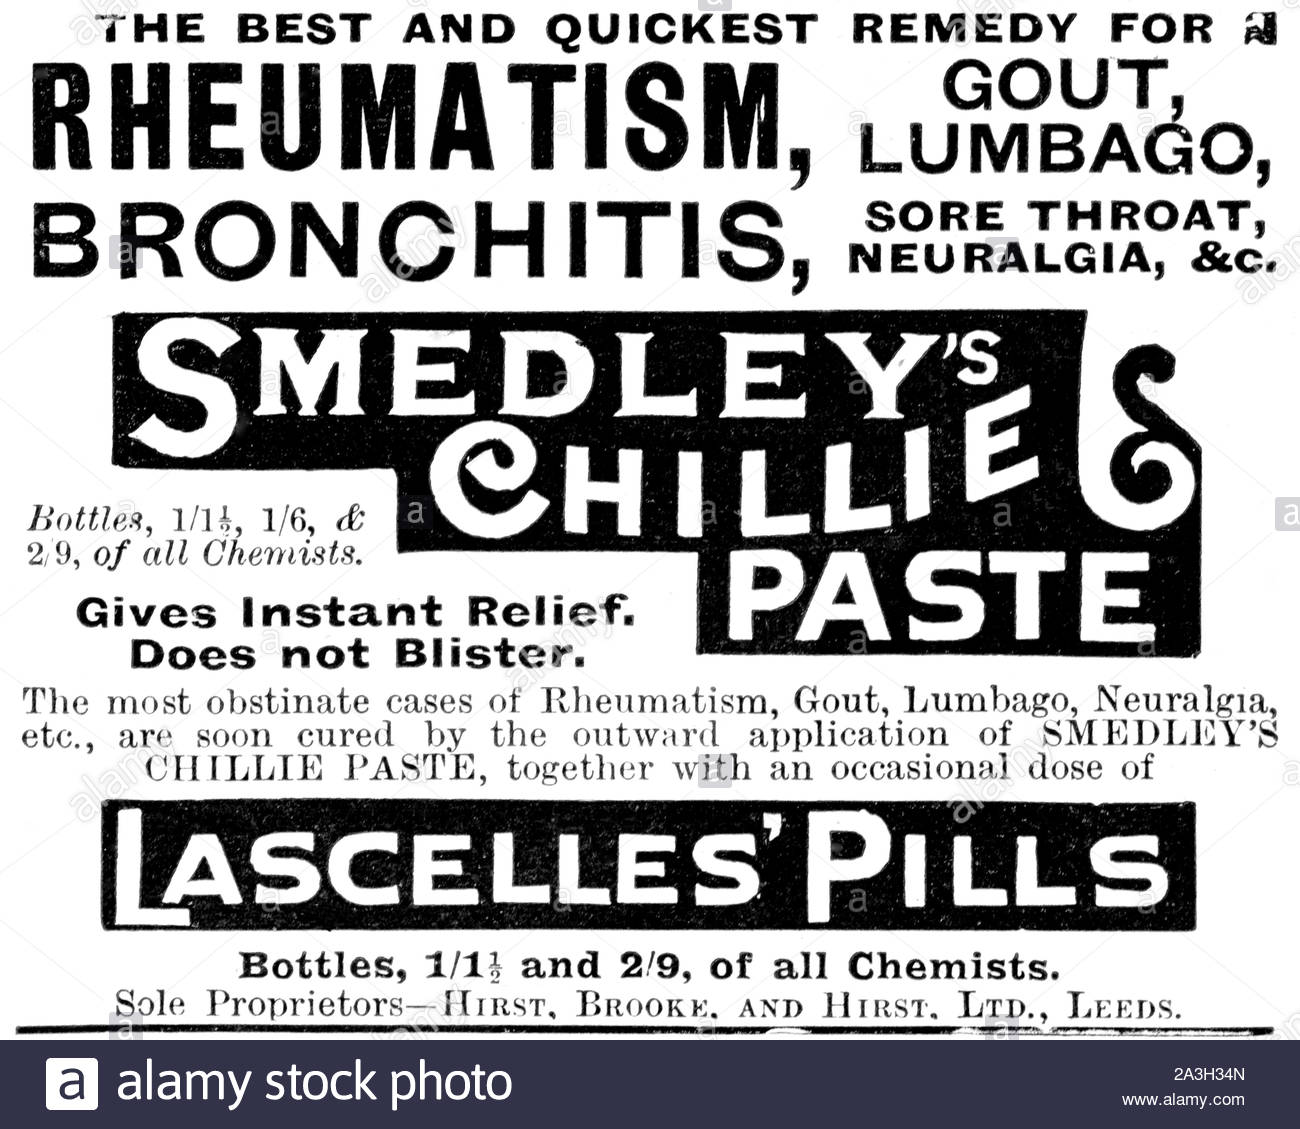 Victorian era, Smedley's Chillie Paste cure all remedy, vintage advertising from 1899 Stock Photo